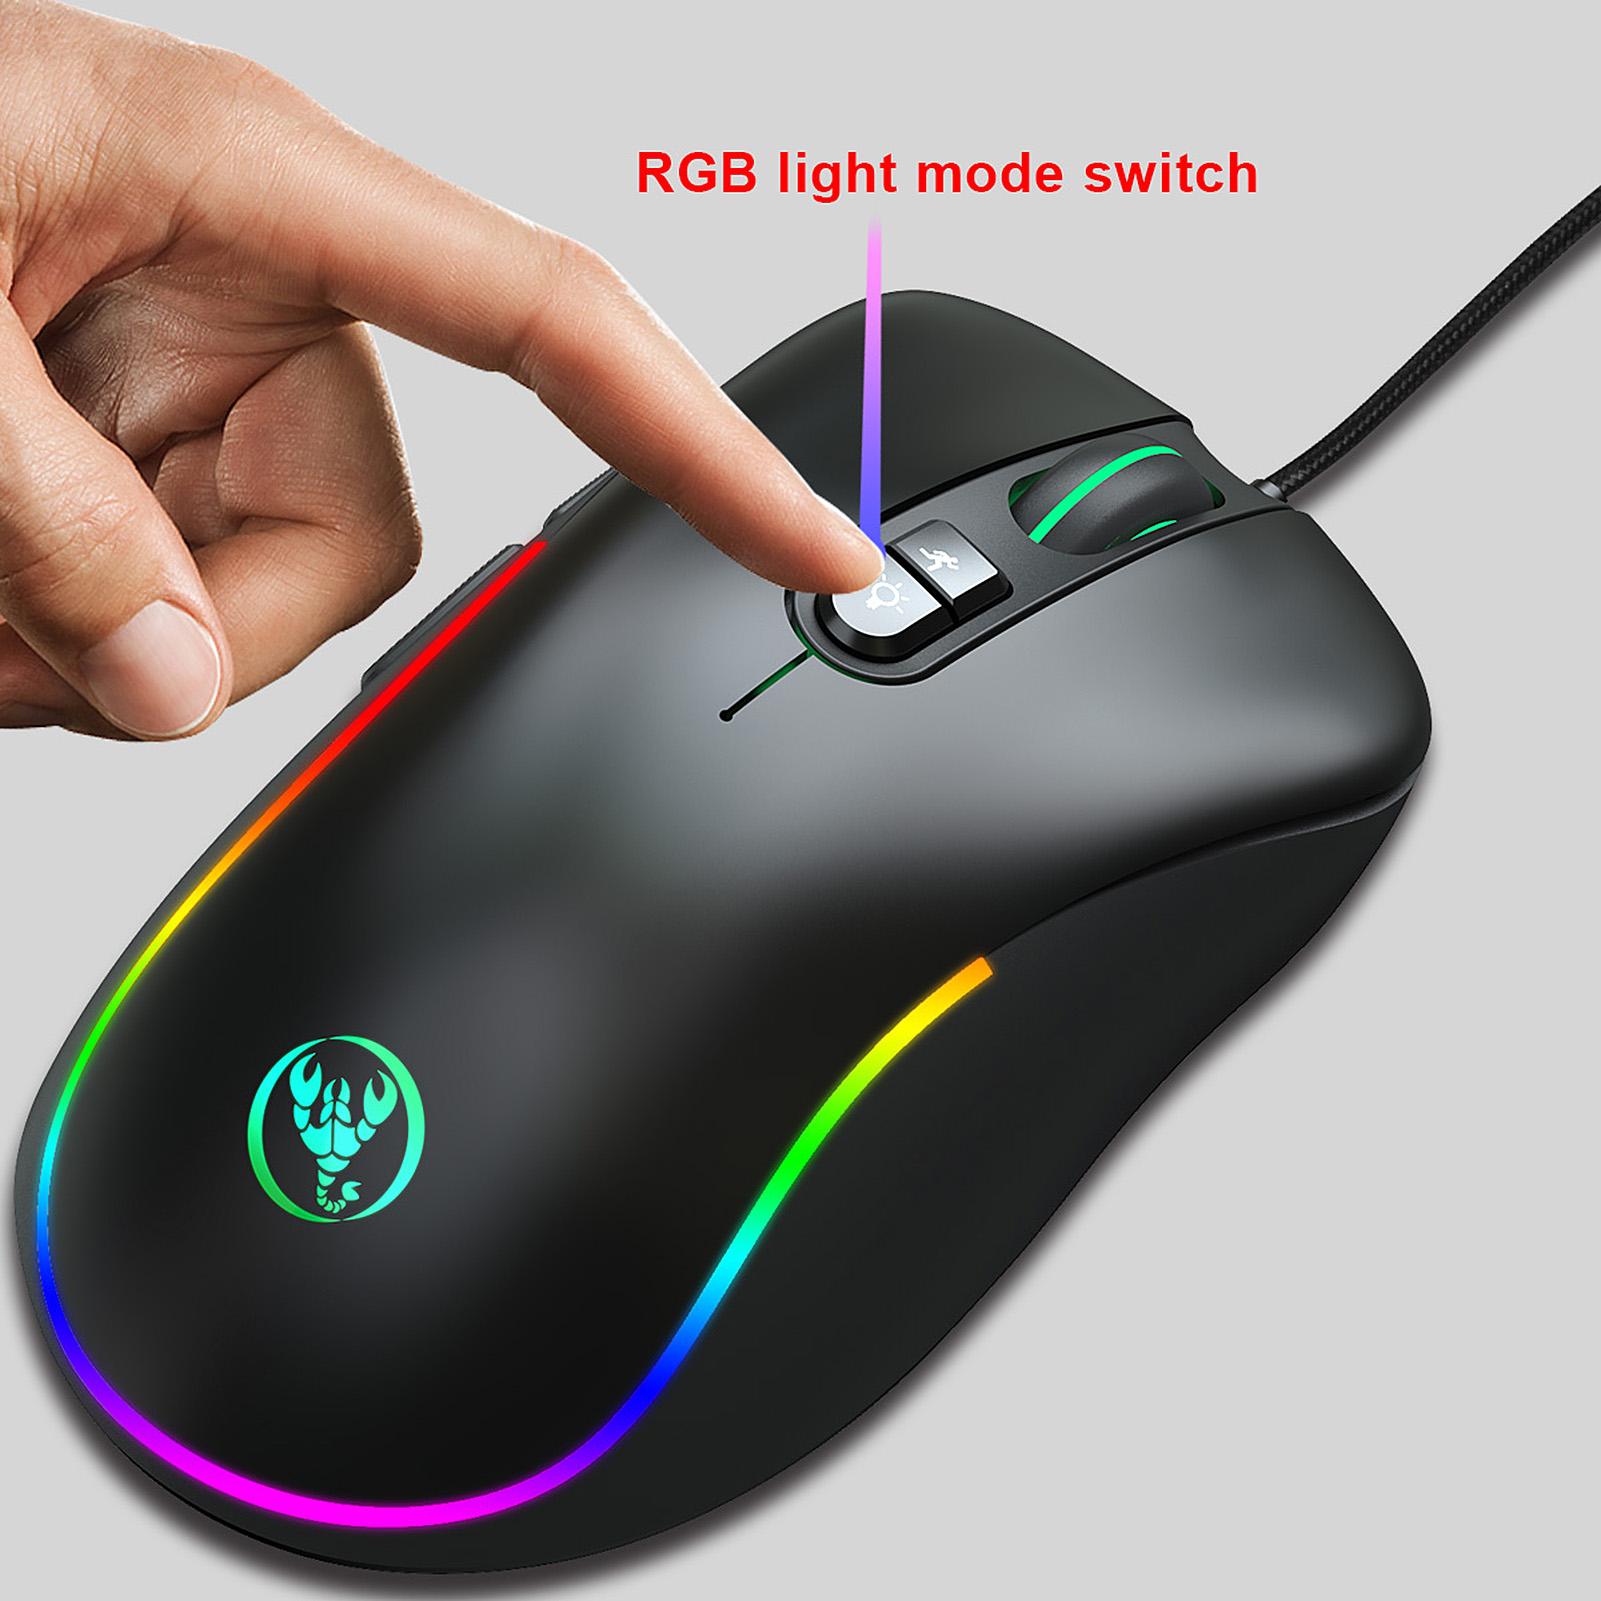 HXSJ J300+V500 Keyboard and Mouse Combo RGB Lighting Programmable Gaming Mouse+One-handed Game Keyboard